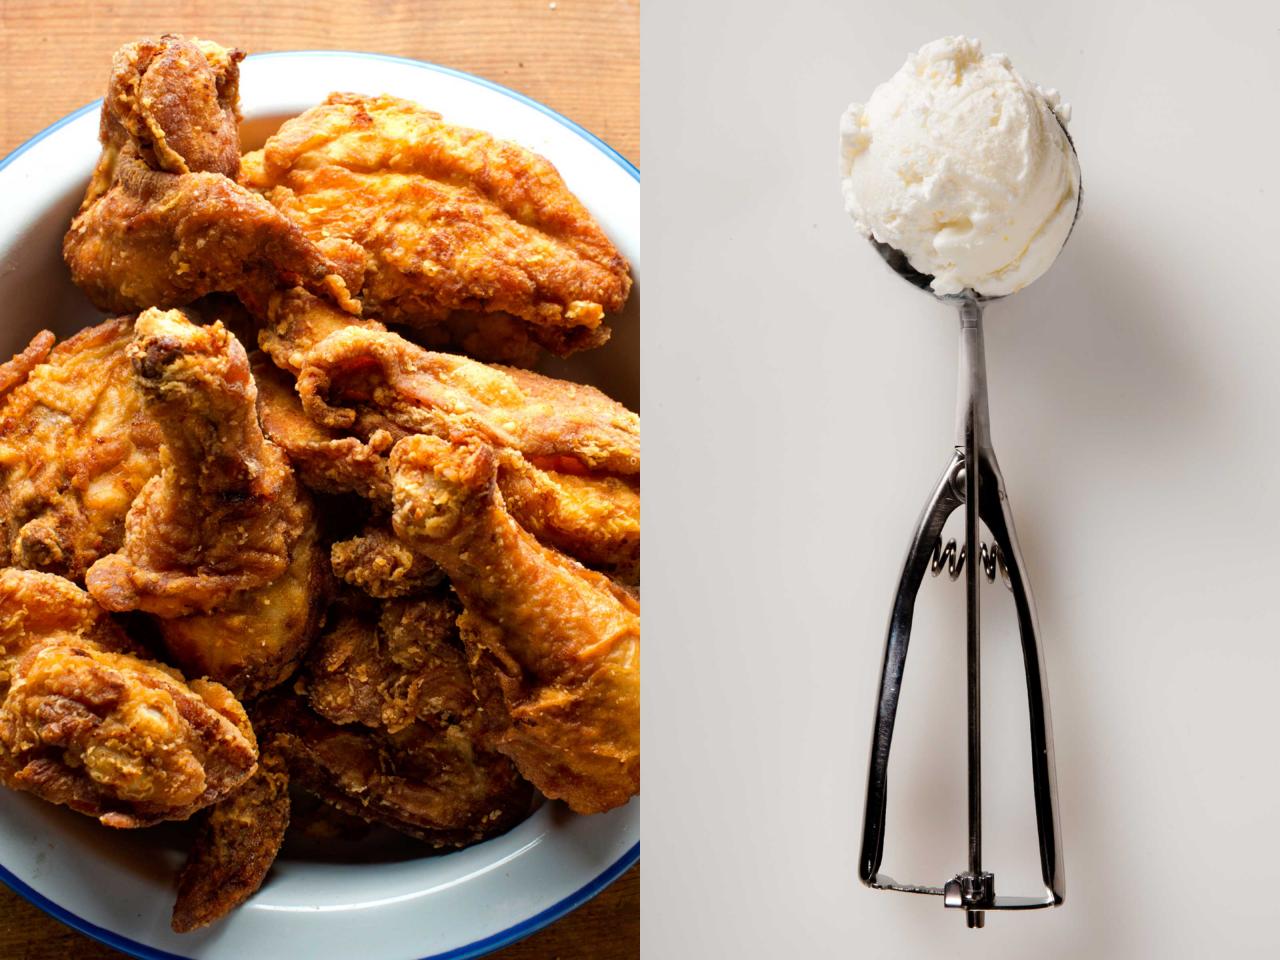 In honor of World Fried Chicken Day, try this ice cream disguised